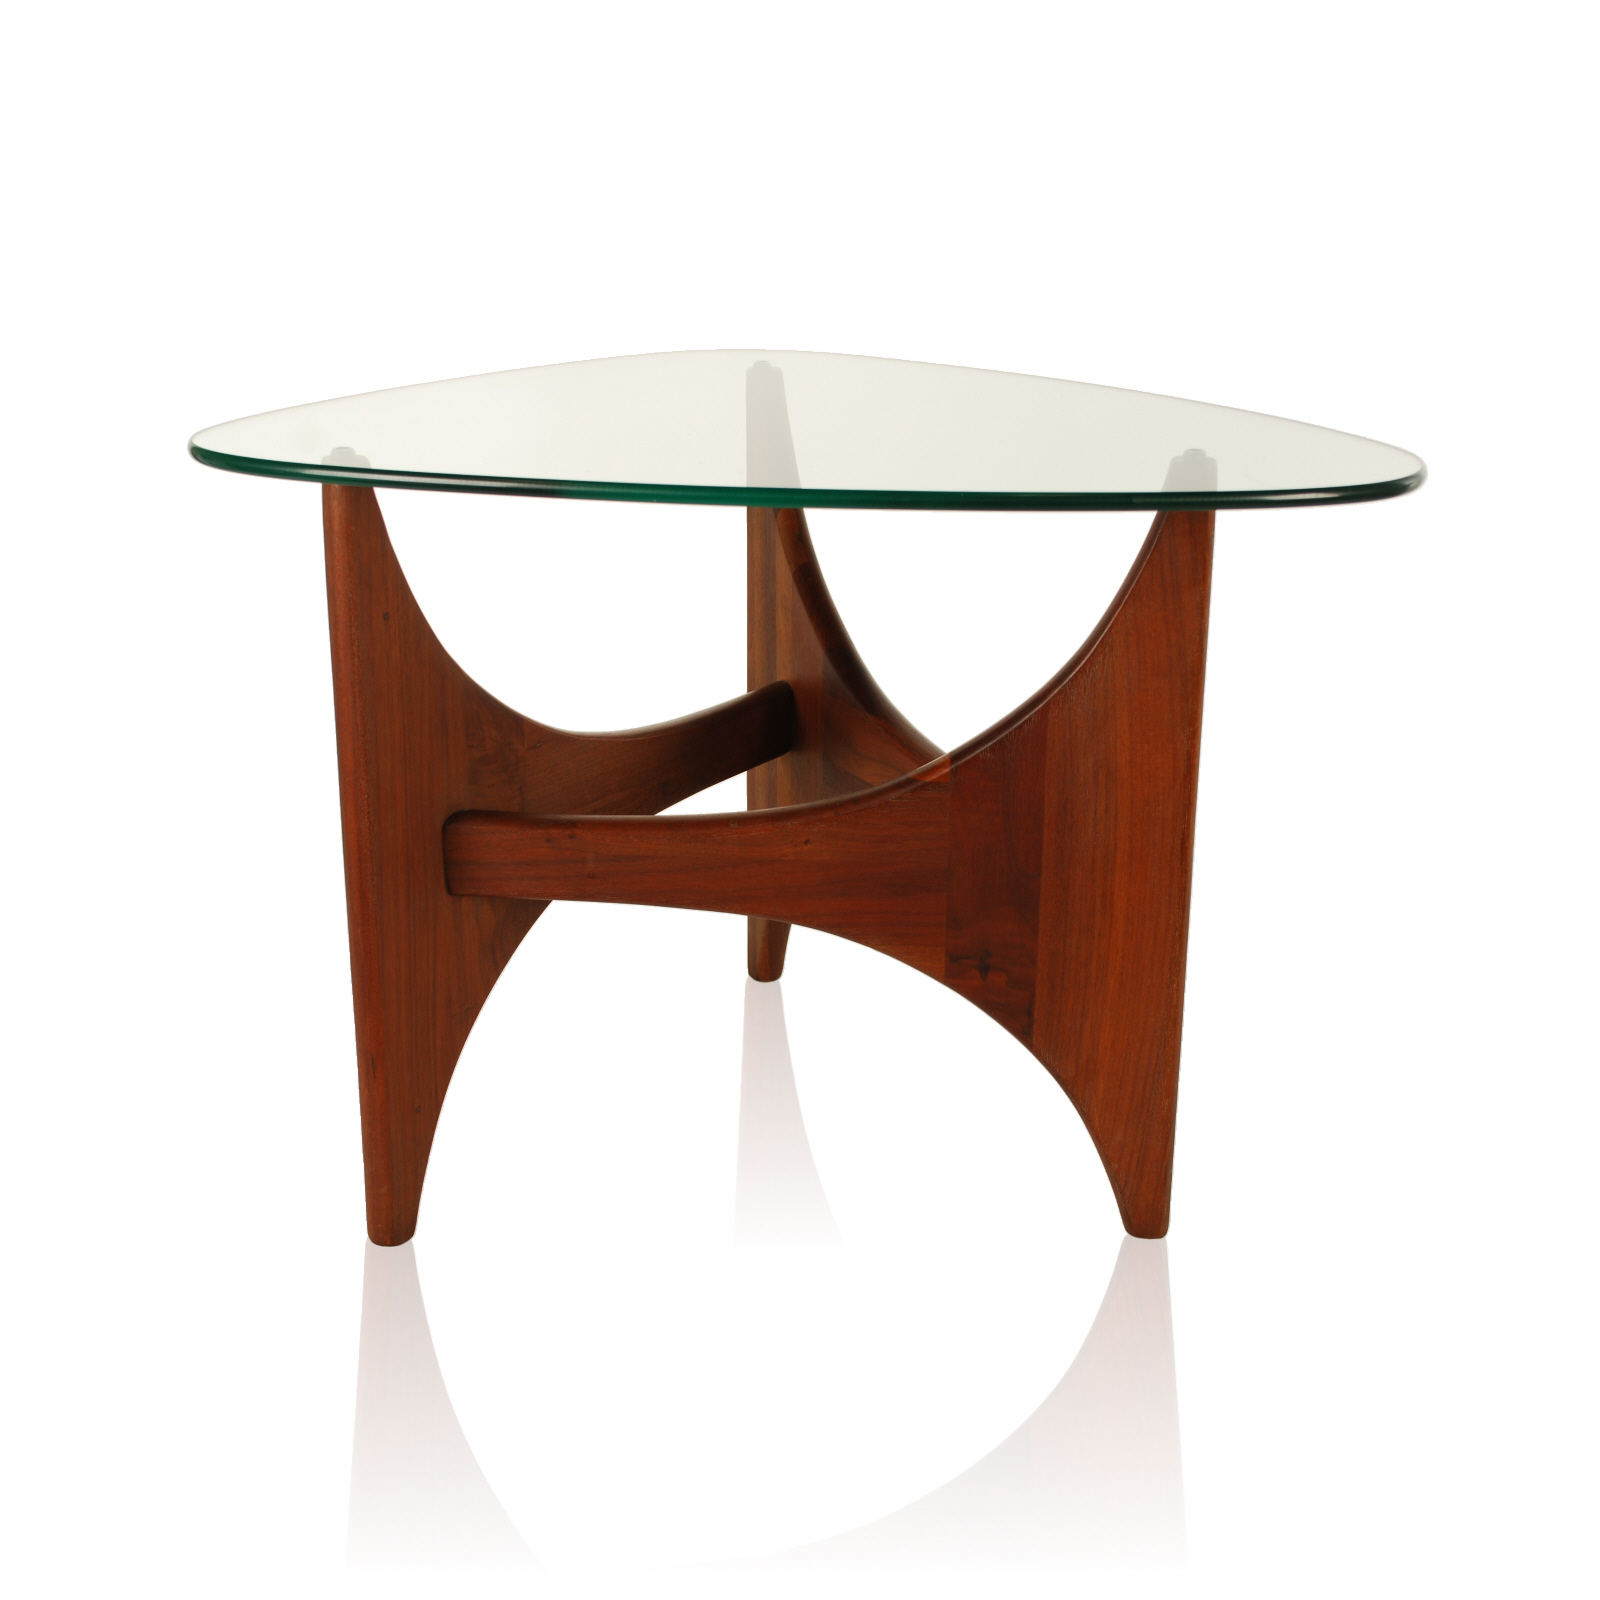 charming triangle glass top modern side table with unique brown furniture inspiration wooden base furnishing ideas fetching artistic design and mid century coffee end tables pine